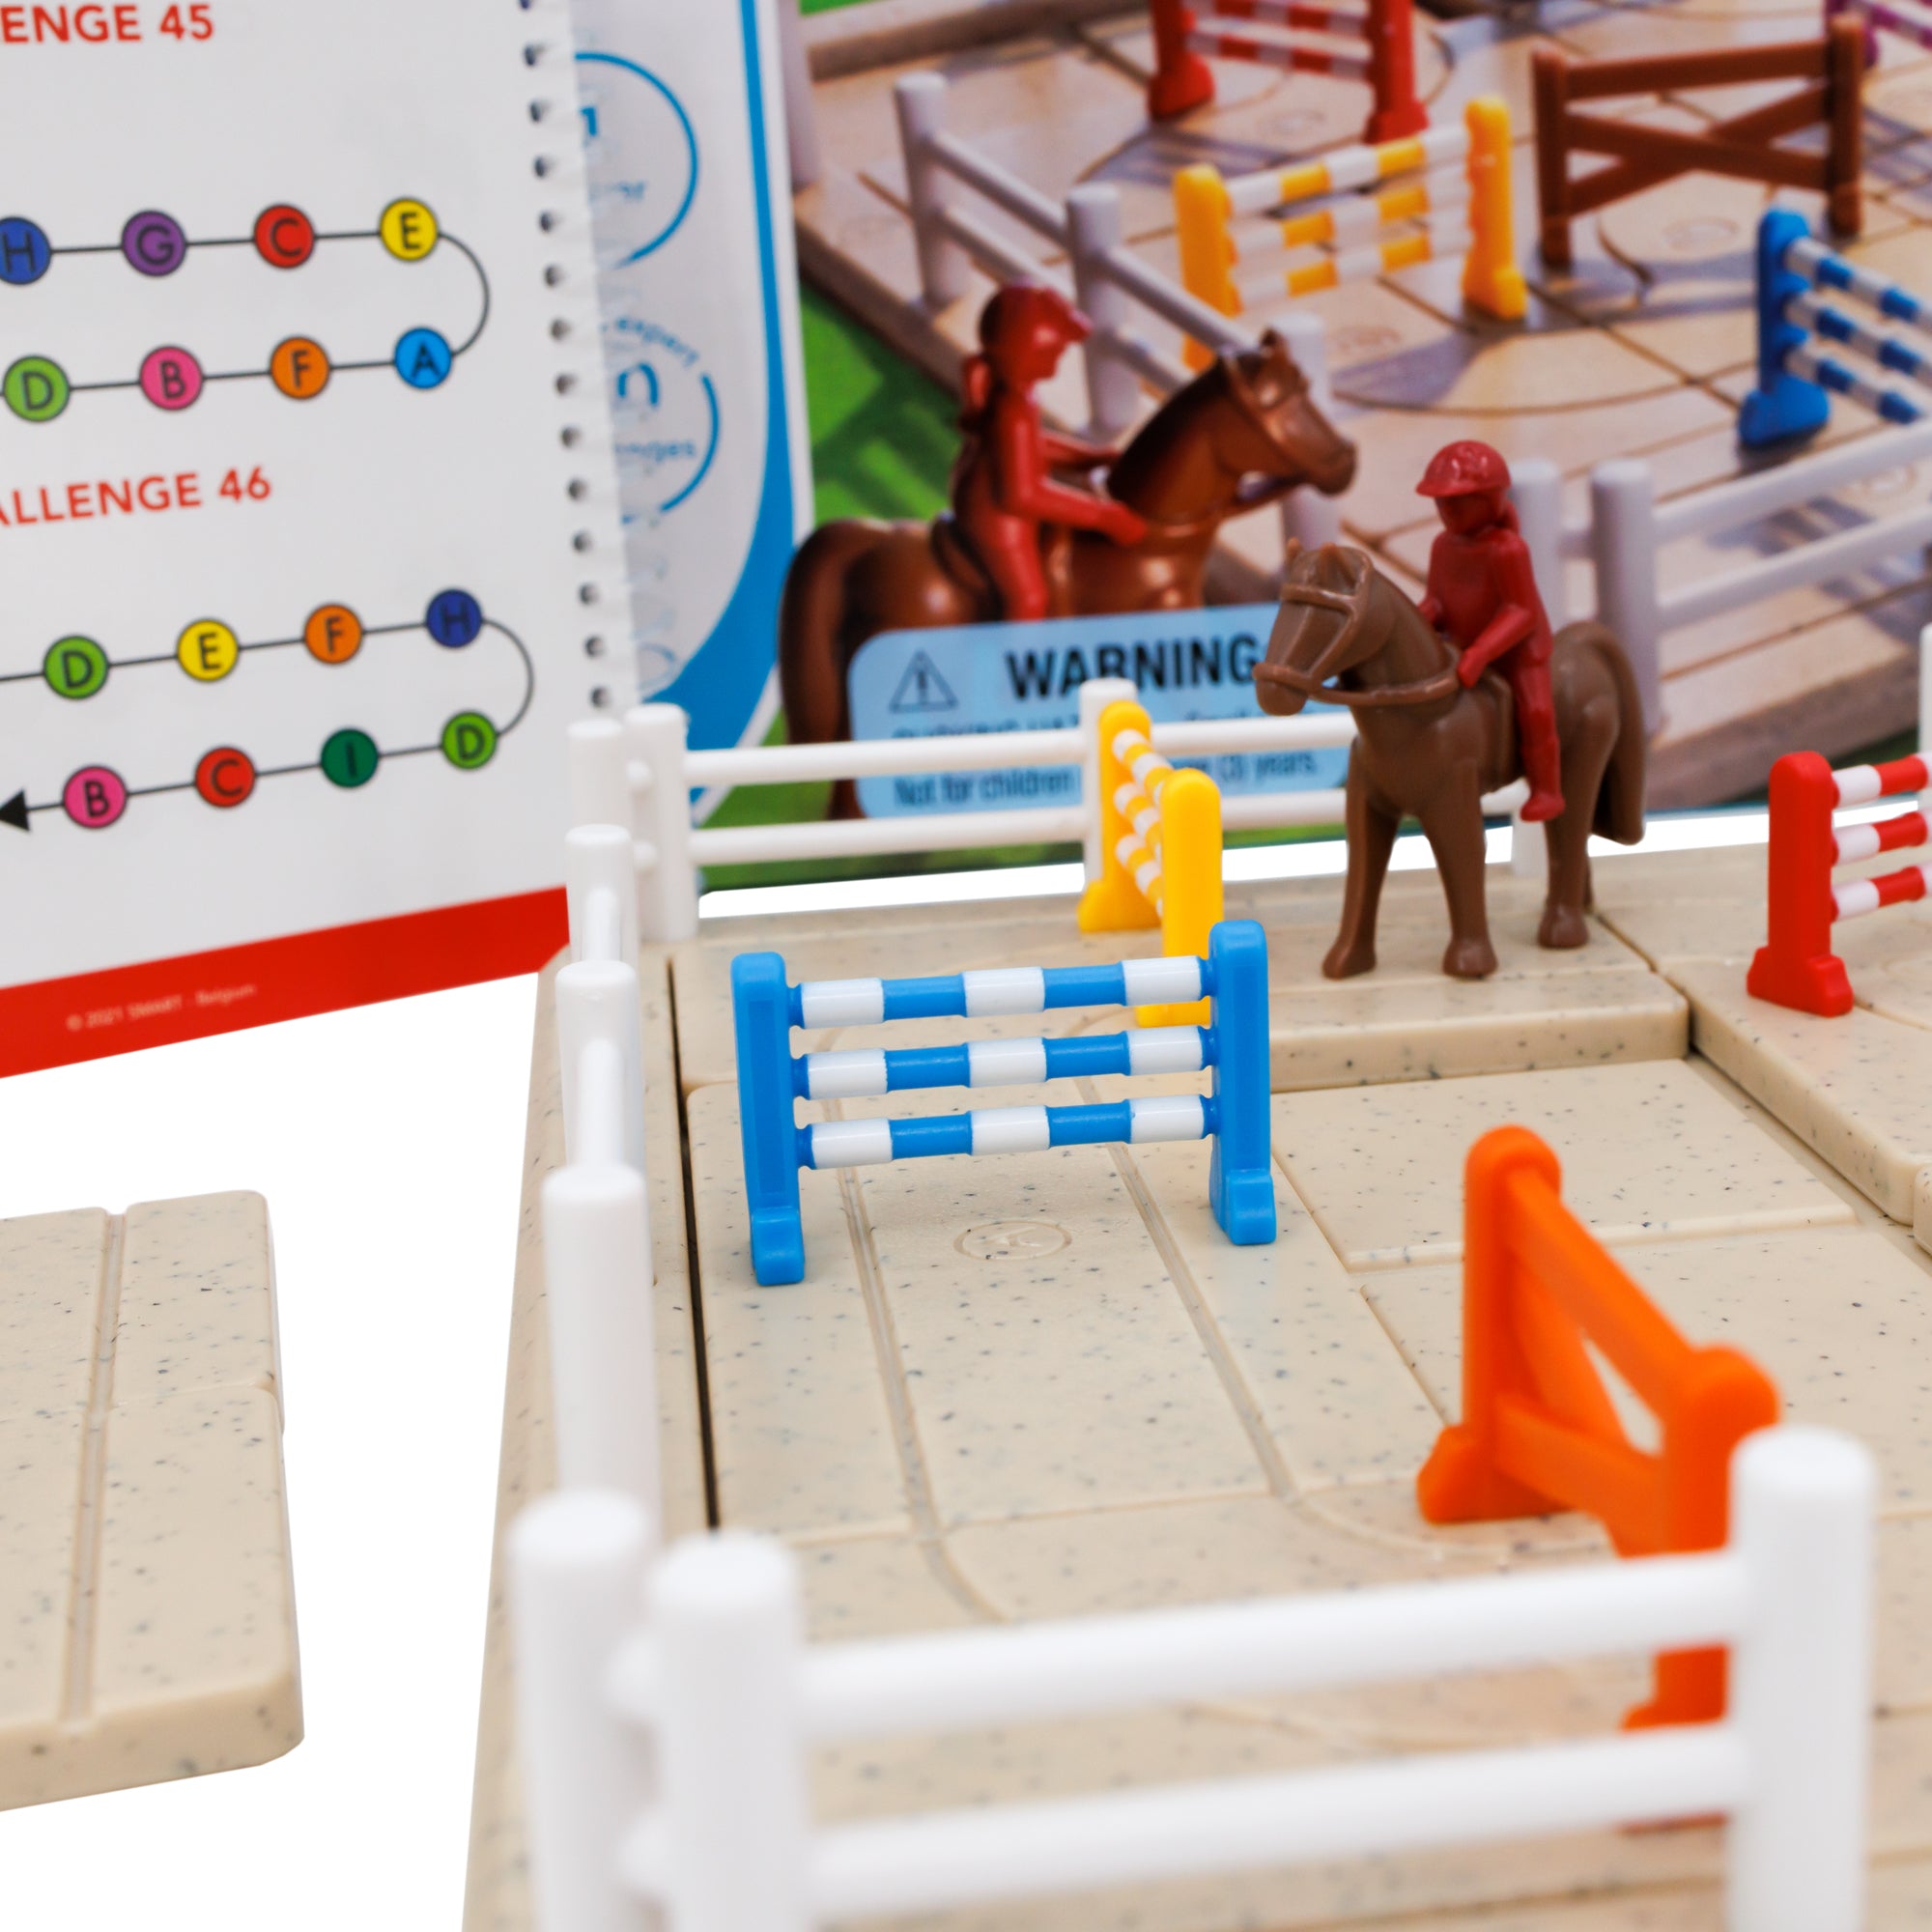 A close up of the Horse Academy game. The game board is a sand-colored rectangle with white fence pieces around the edges. There a several jumping fence pieces in many colors on the game board and a red girl character on top of a horse piece in between the fences. You can see the game box and the instruction booklet in the background, out of focus.